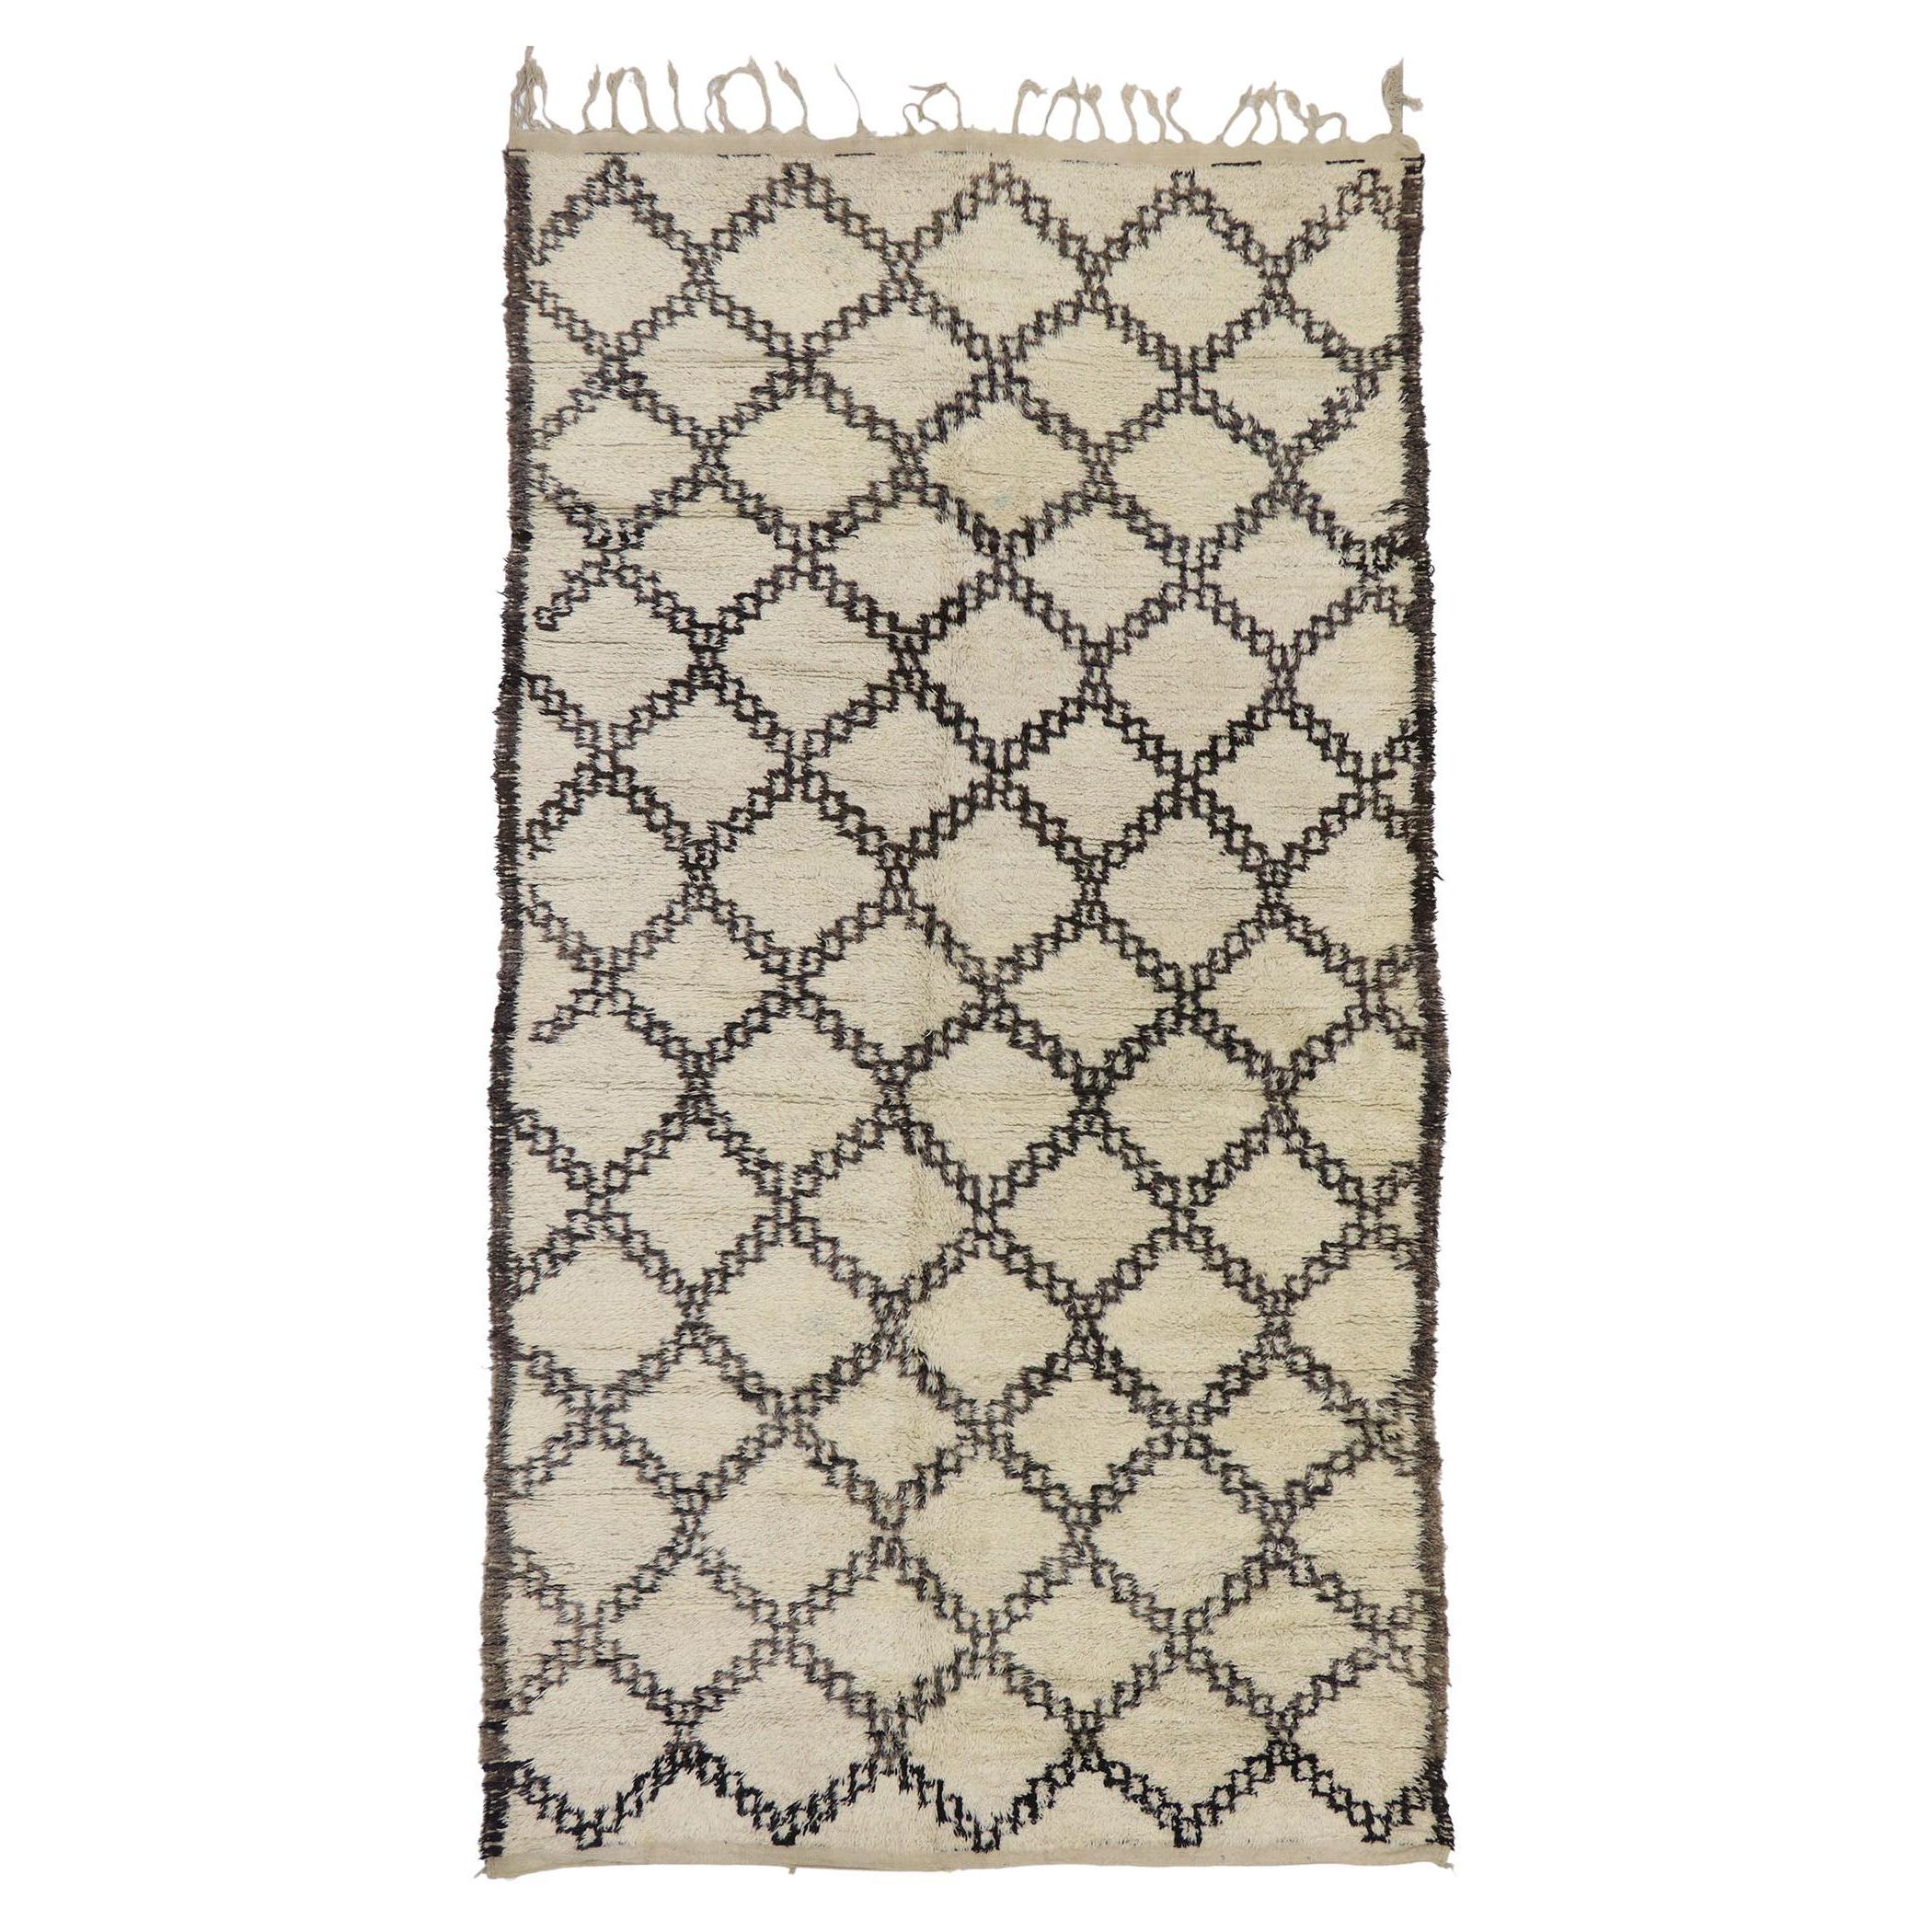 Vintage Berber Beni Ourain Moroccan Rug with Mid-Century Modern Style For Sale